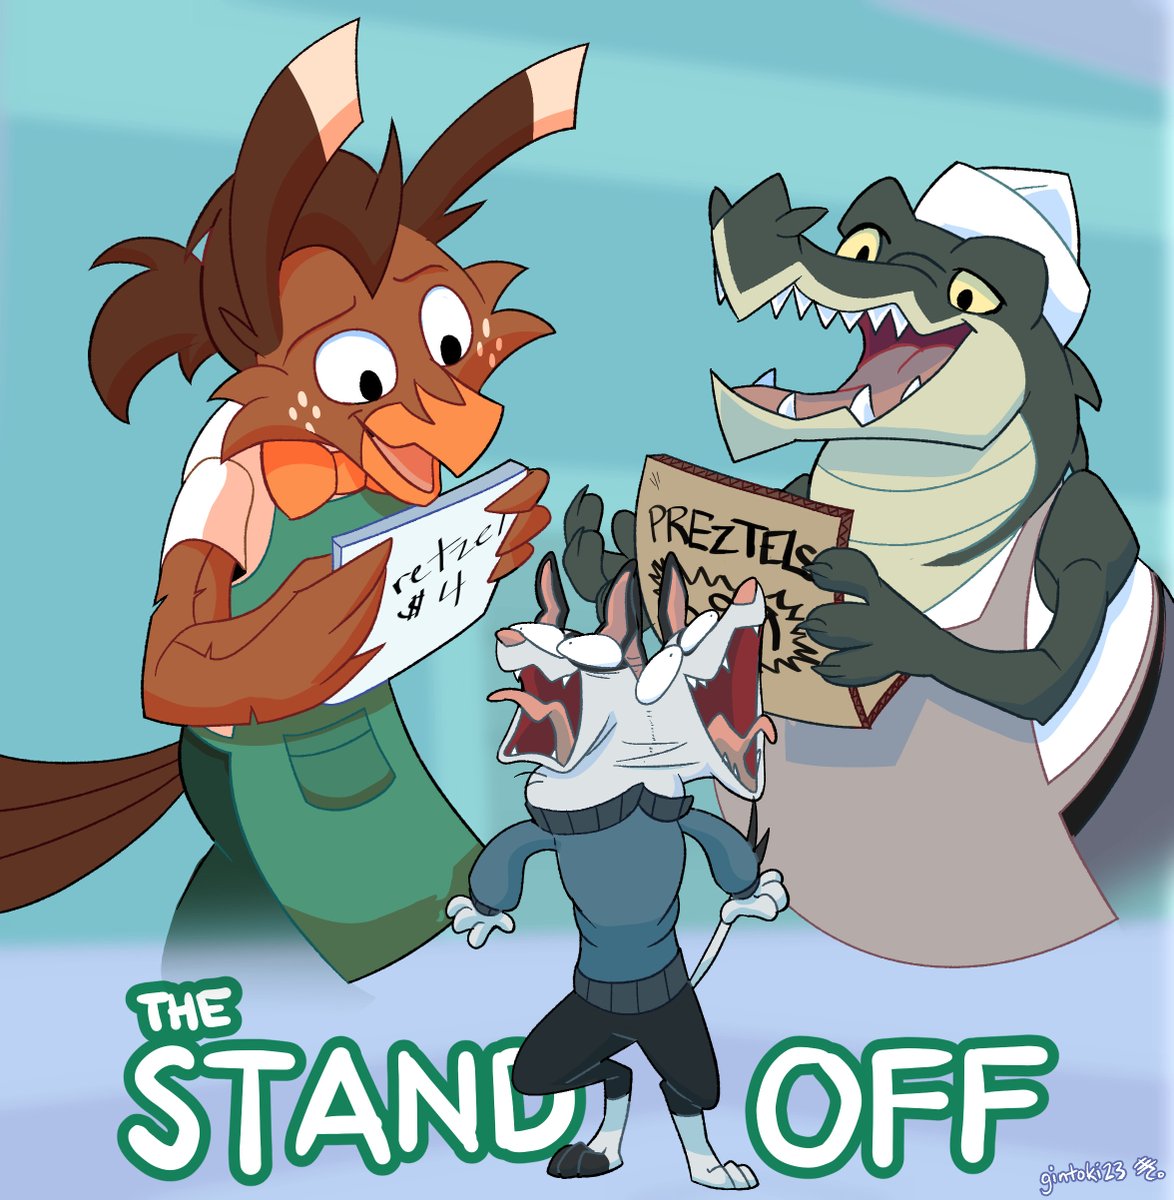 Short 02 is OUT! Introducing Carv and customer Jasper! I had a ton of fun doin' the crazy expressions. C: Link to short in reply! ⬇️